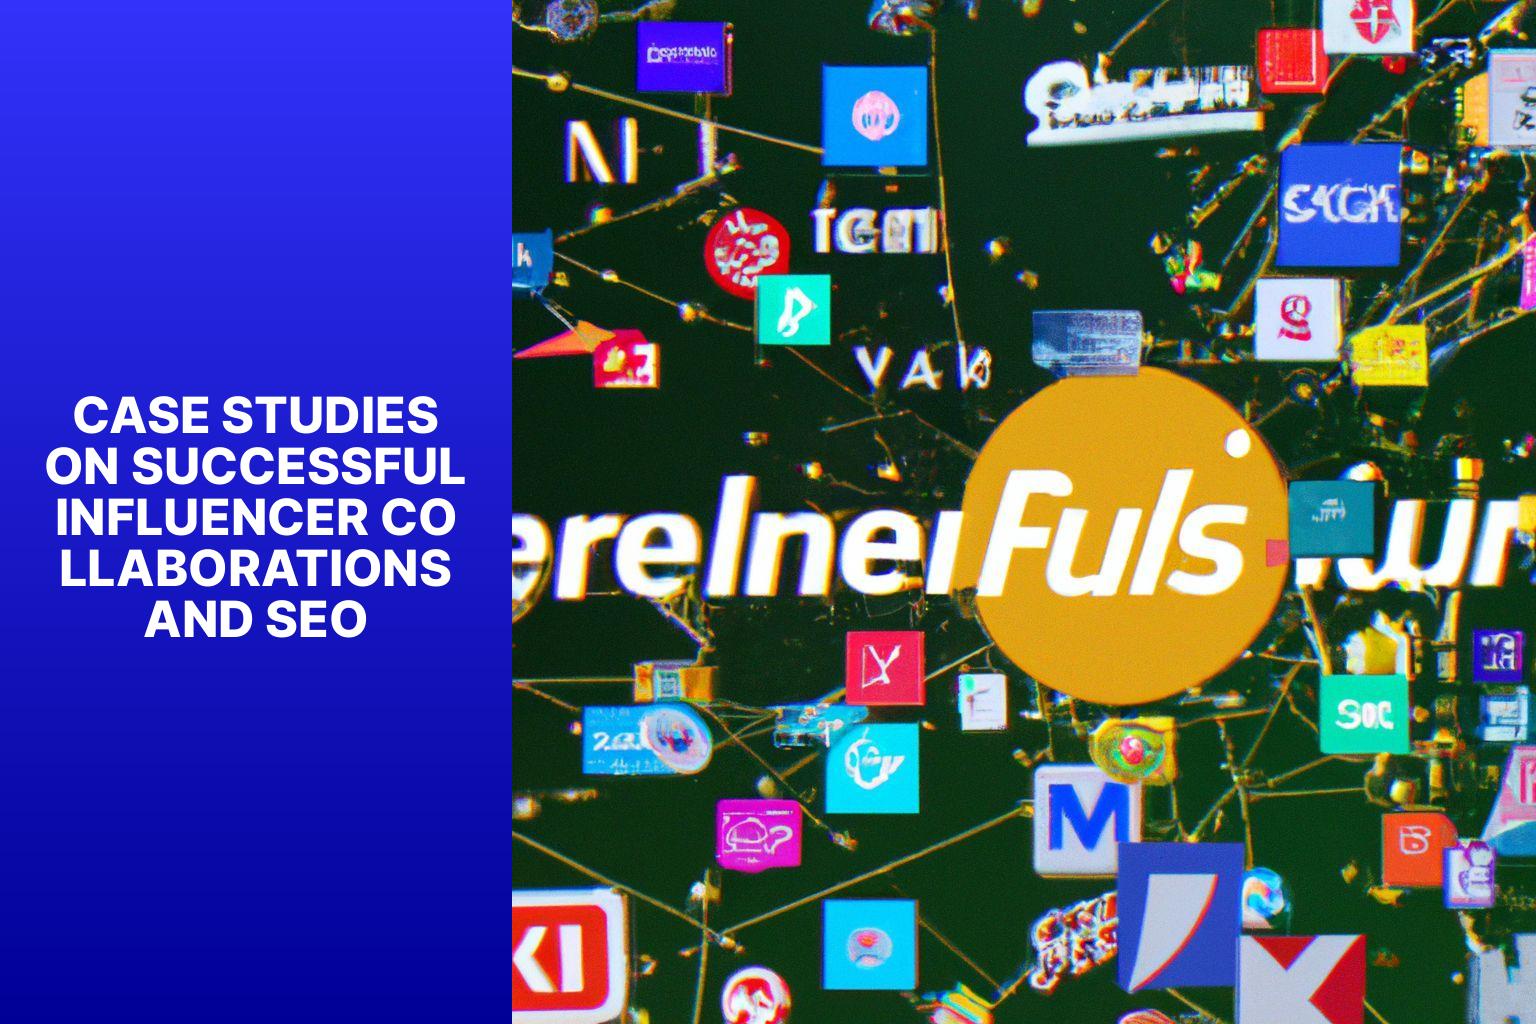 Case Studies on Successful Influencer Collaborations and SEO - Influencer Collaborations and SEO Synergies 